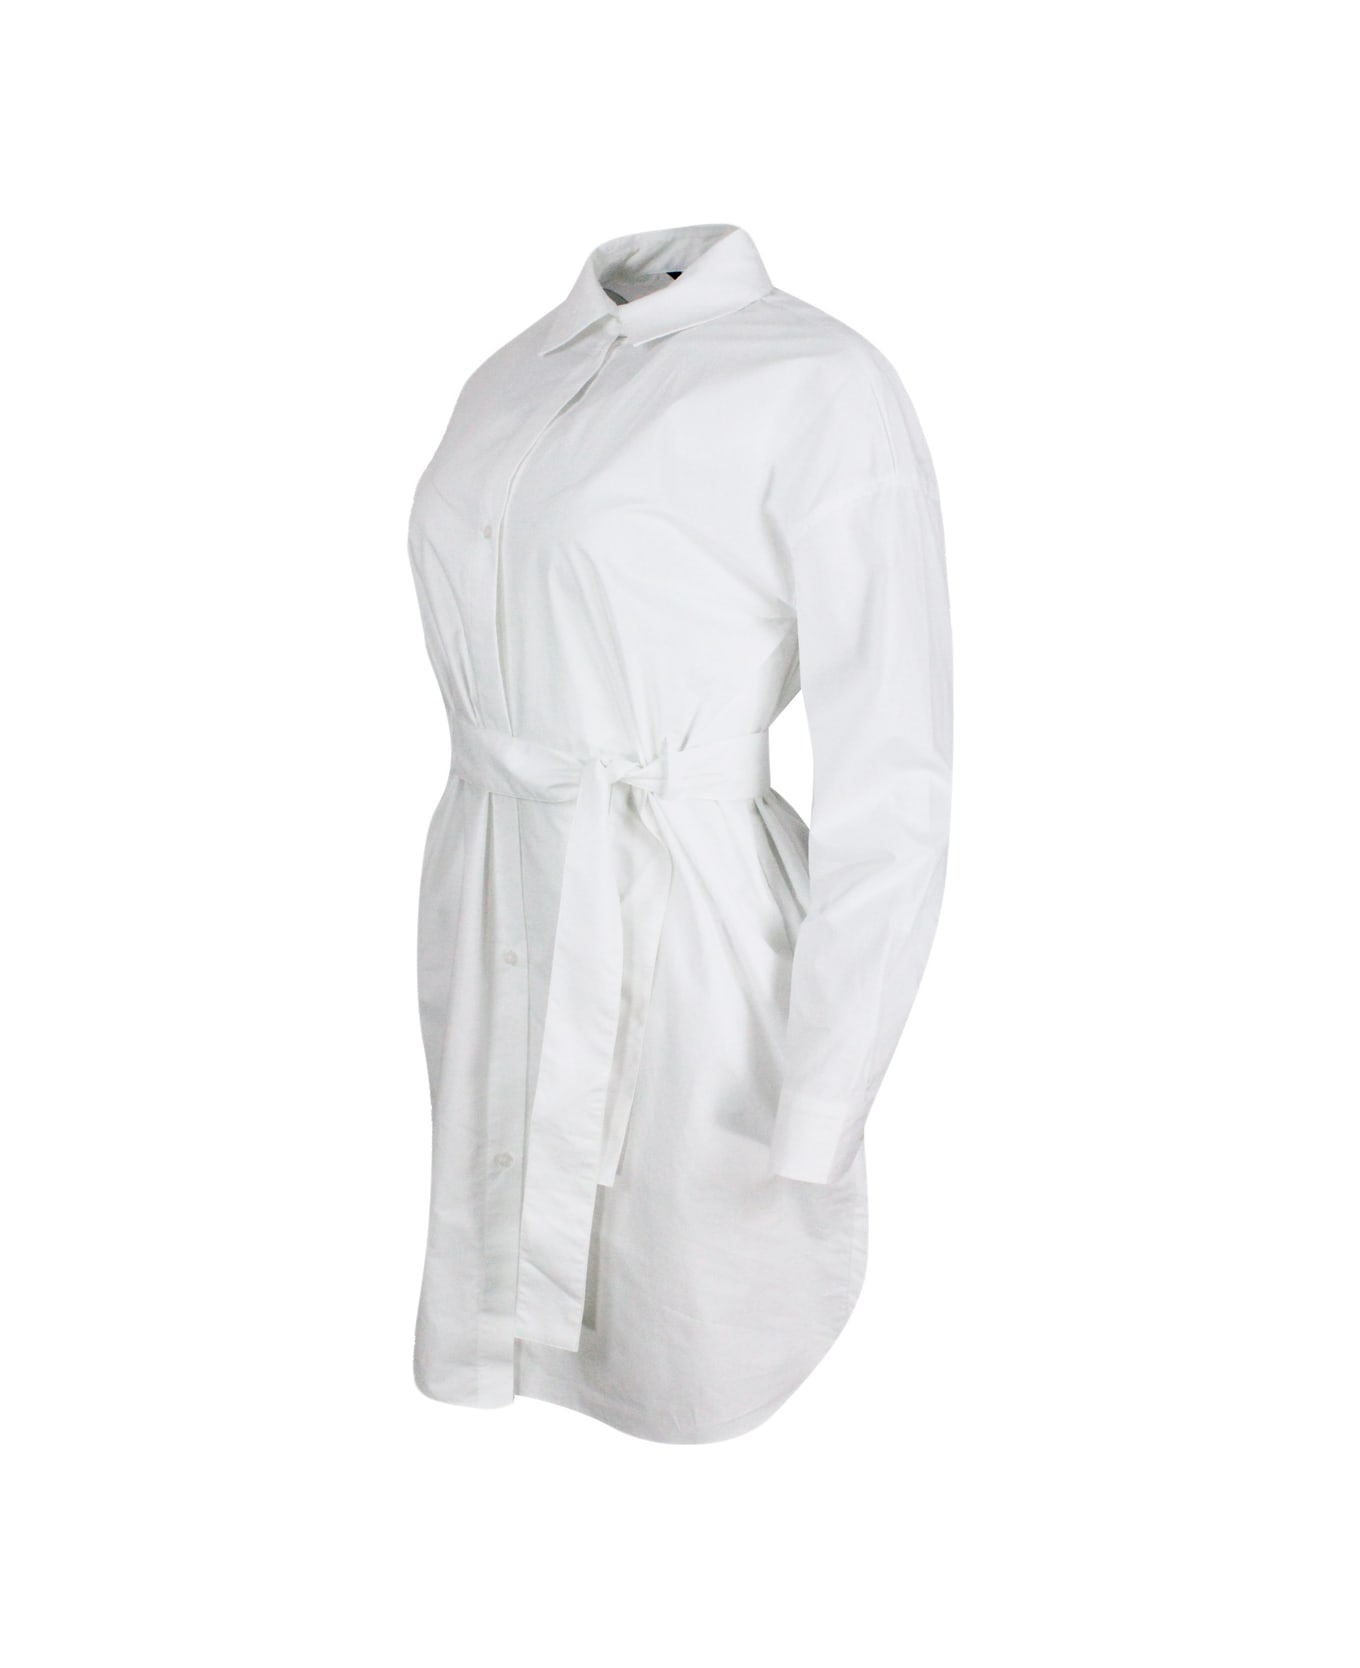 Armani Collezioni Dress Made Of Soft Cotton With Long Sleeves, With Button Closure On The Front And Belt. - White